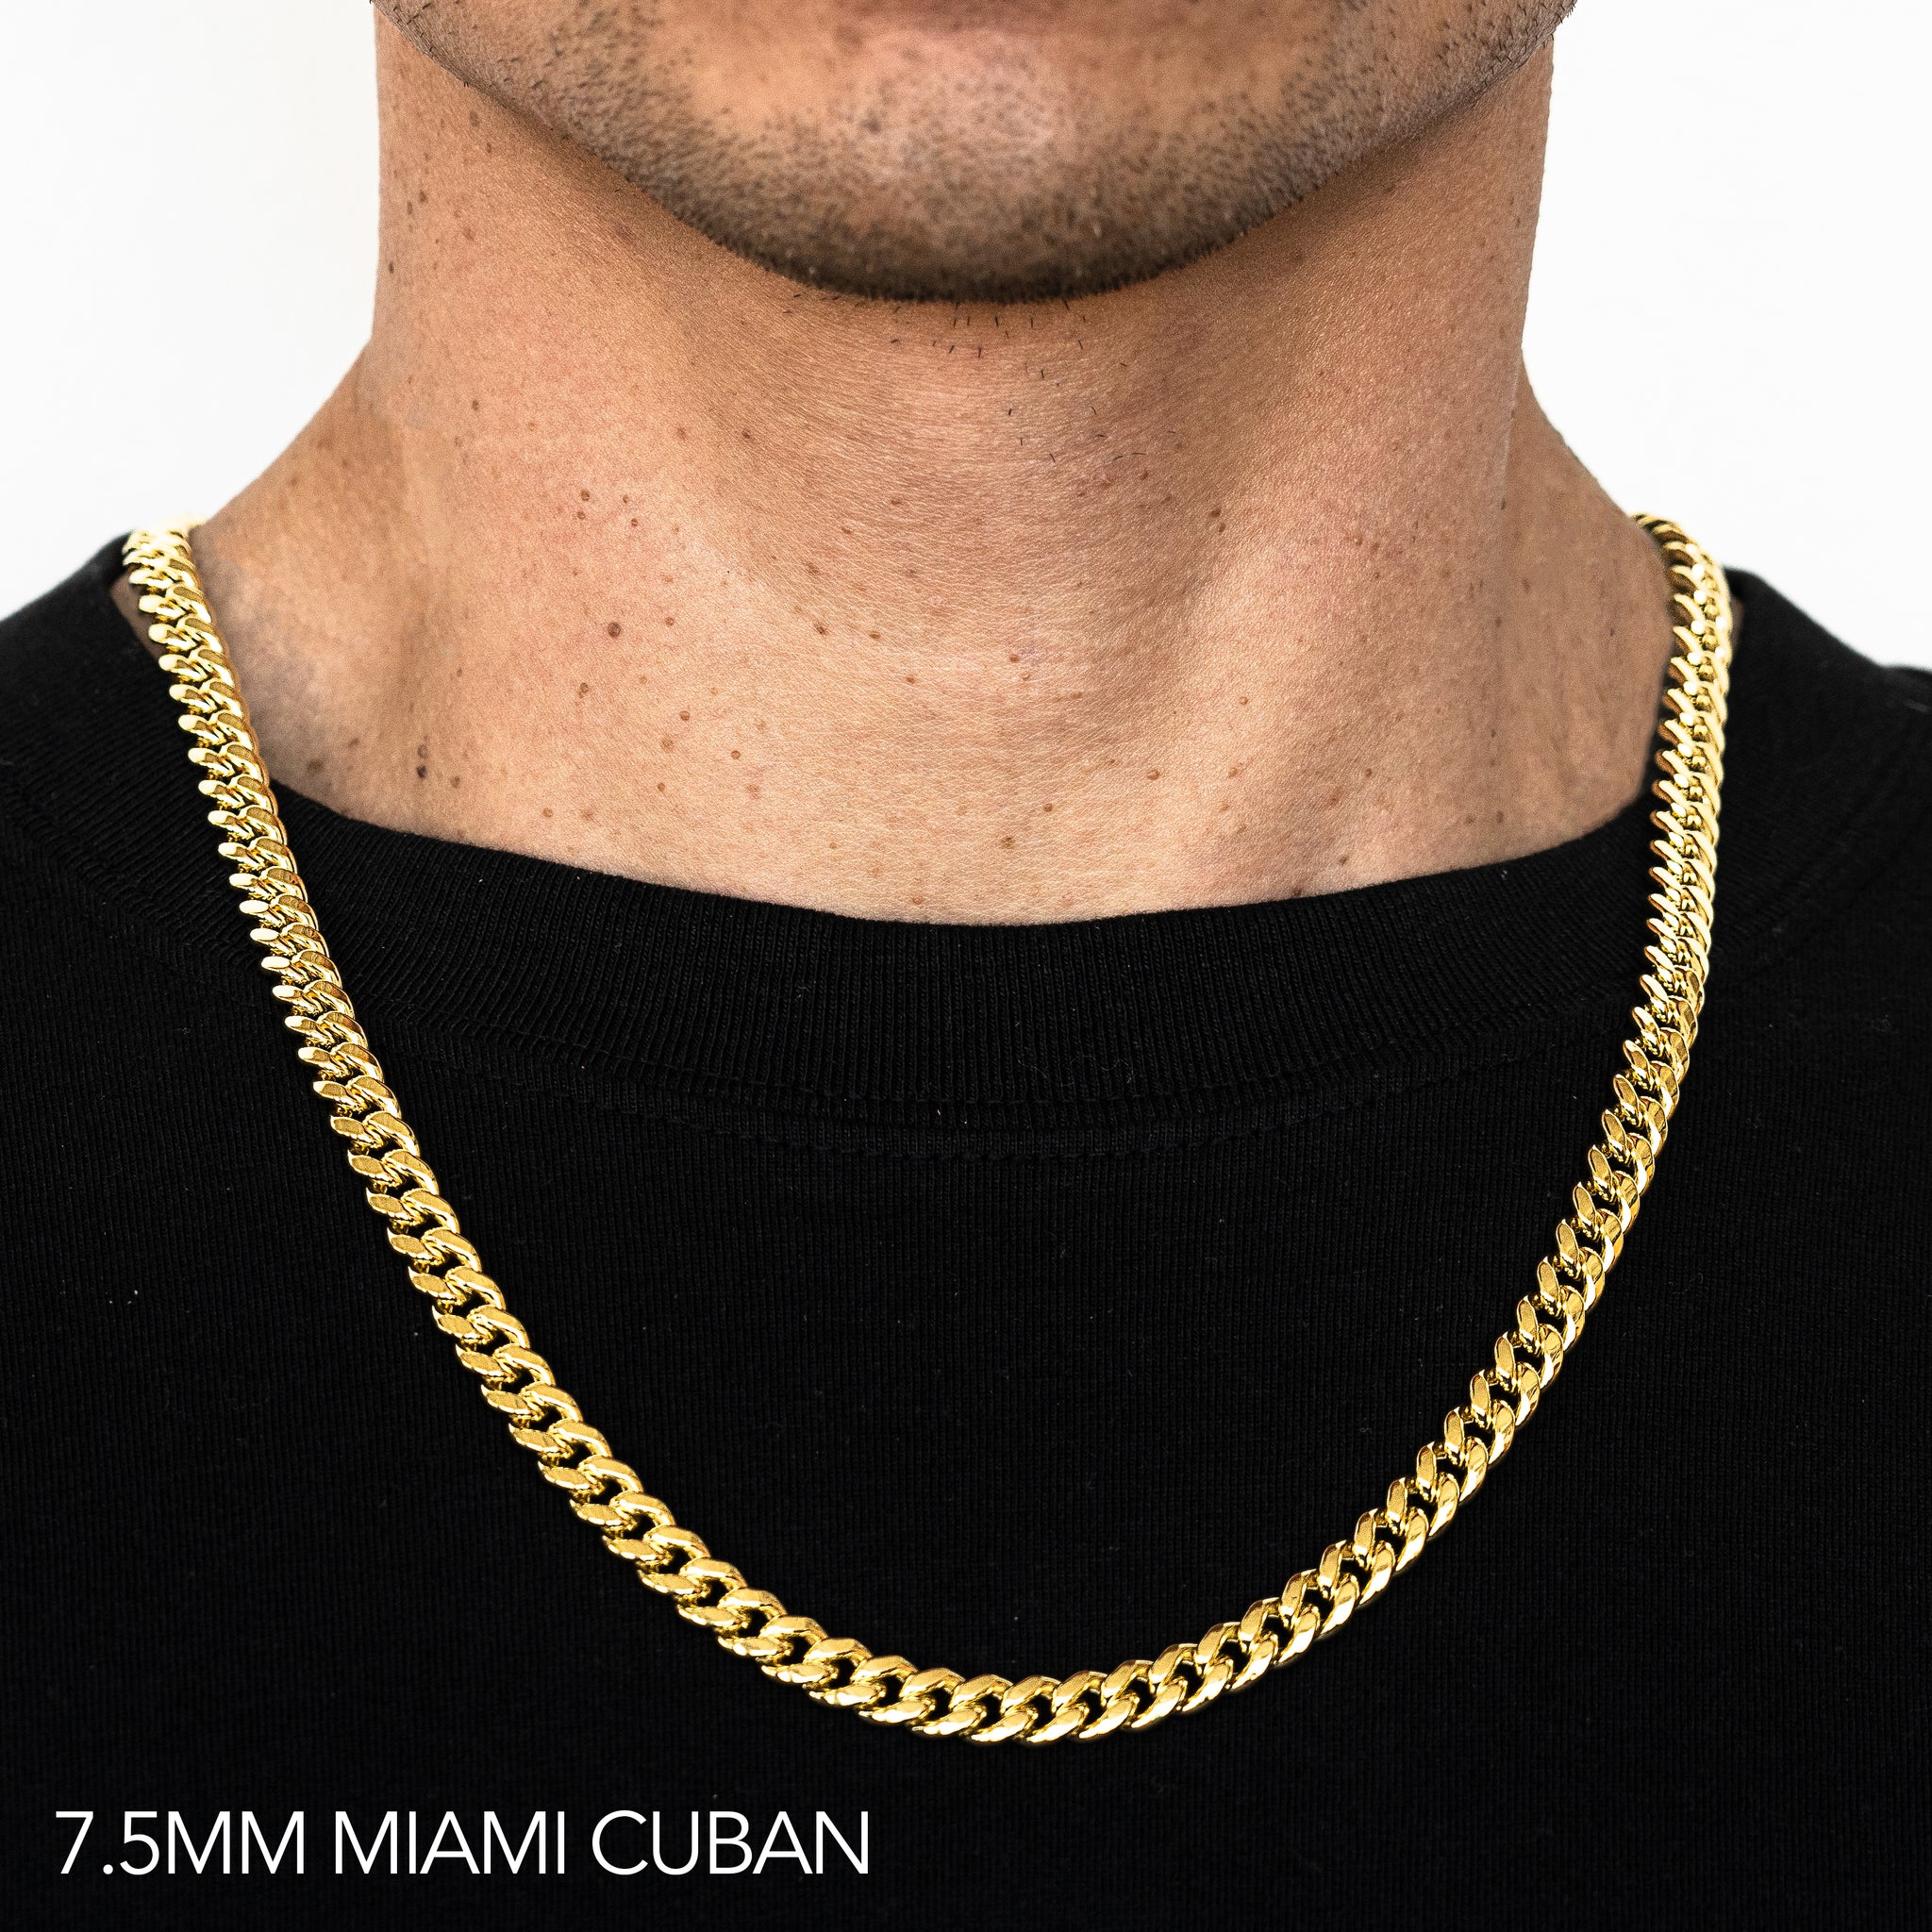 14K 7.5MM YELLOW GOLD HOLLOW MIAMI CUBAN 24 CHAIN NECKLACE"